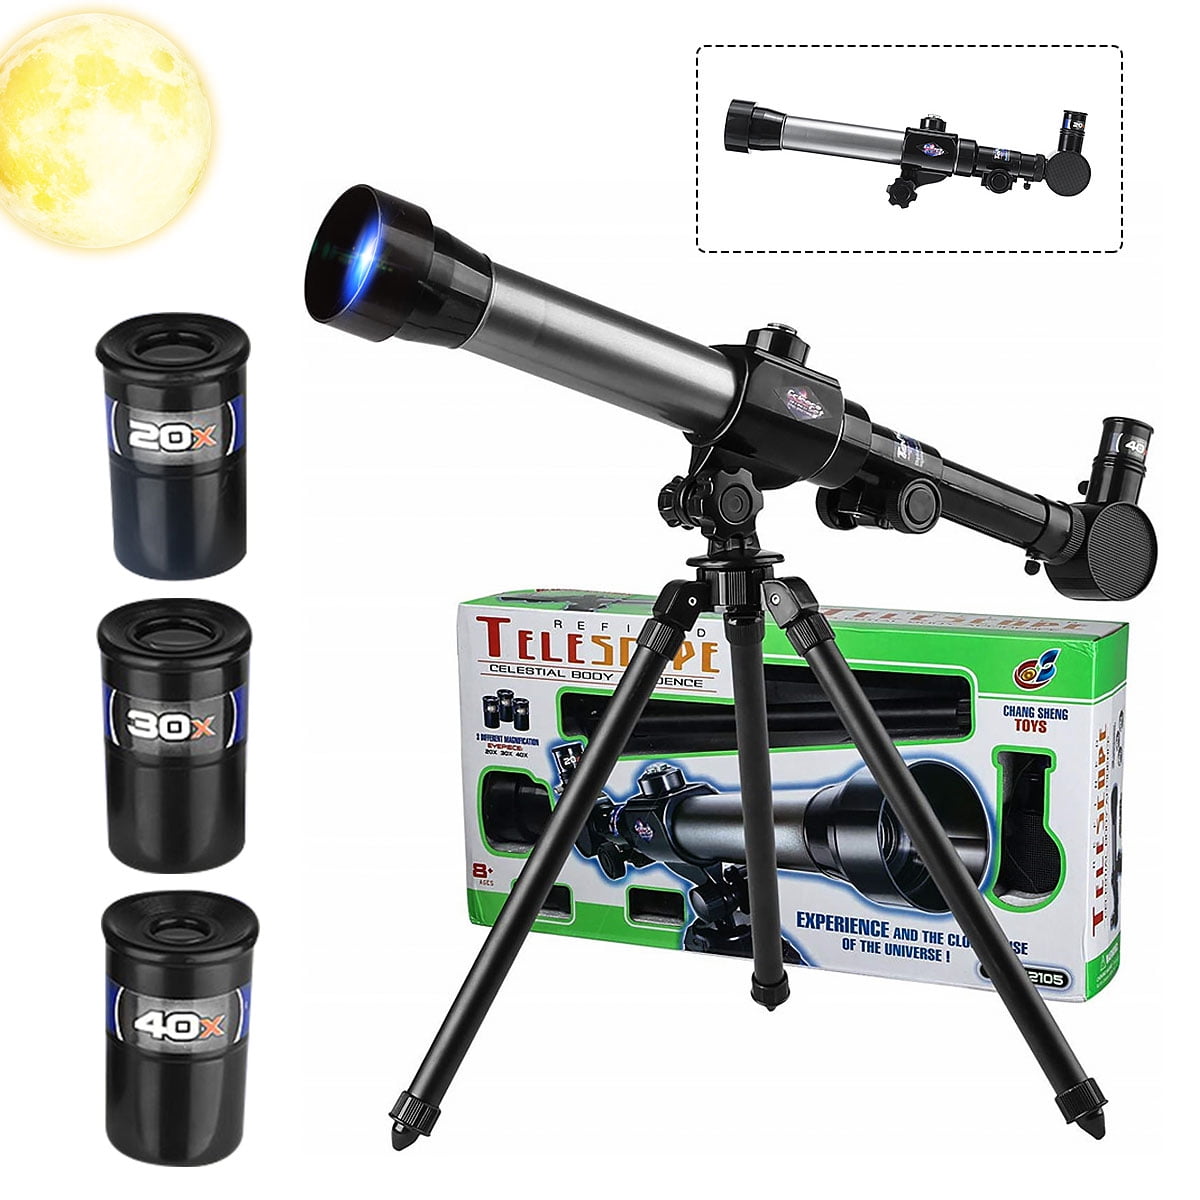 Children Science Education Astronomical Telescope Toys High-Powered 20X 40X 60X Wenini Telescope for Kids Beginners Adults with Adjustable Tripod Perfect Telescope Gift for Kids Blue 